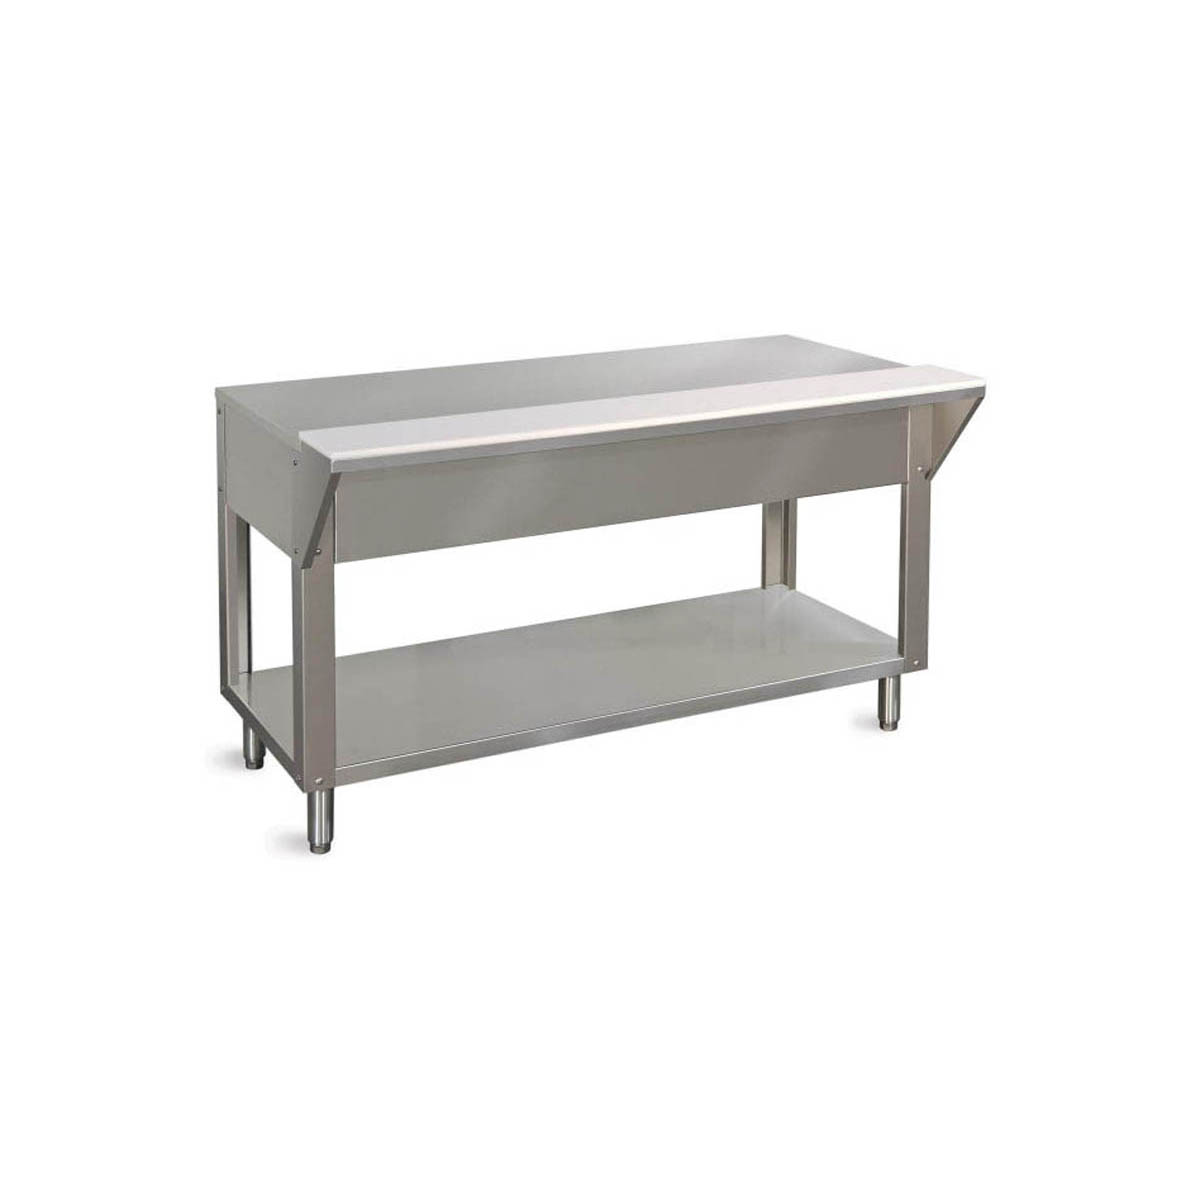 Piper Products DB-5-ST Utility Serving Counter